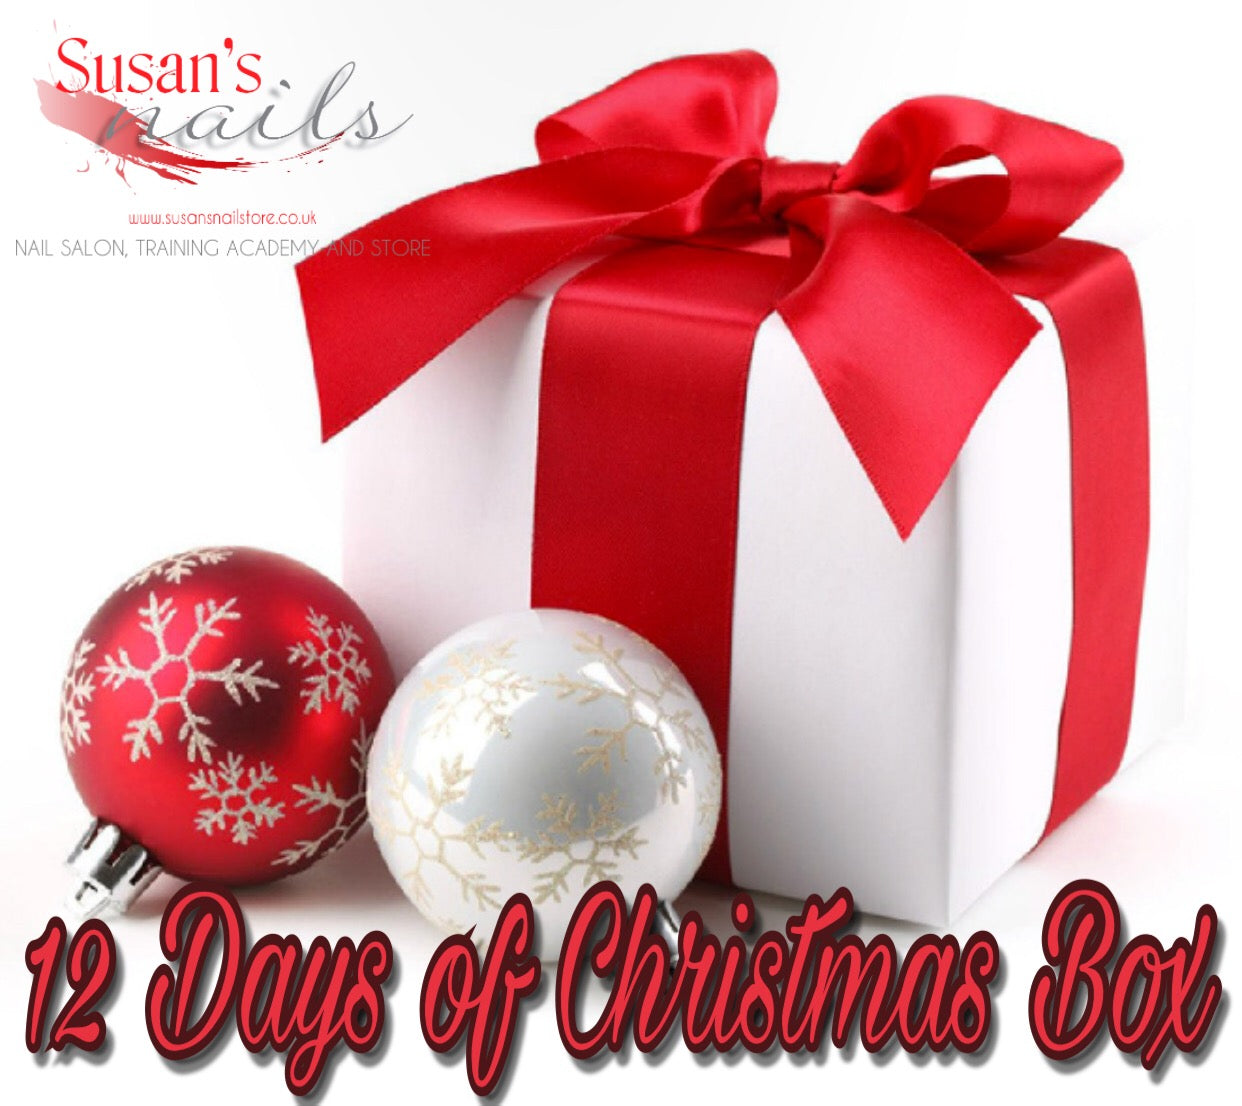 12 Days of Christmas Box- A Hand Picked Secret Selection!